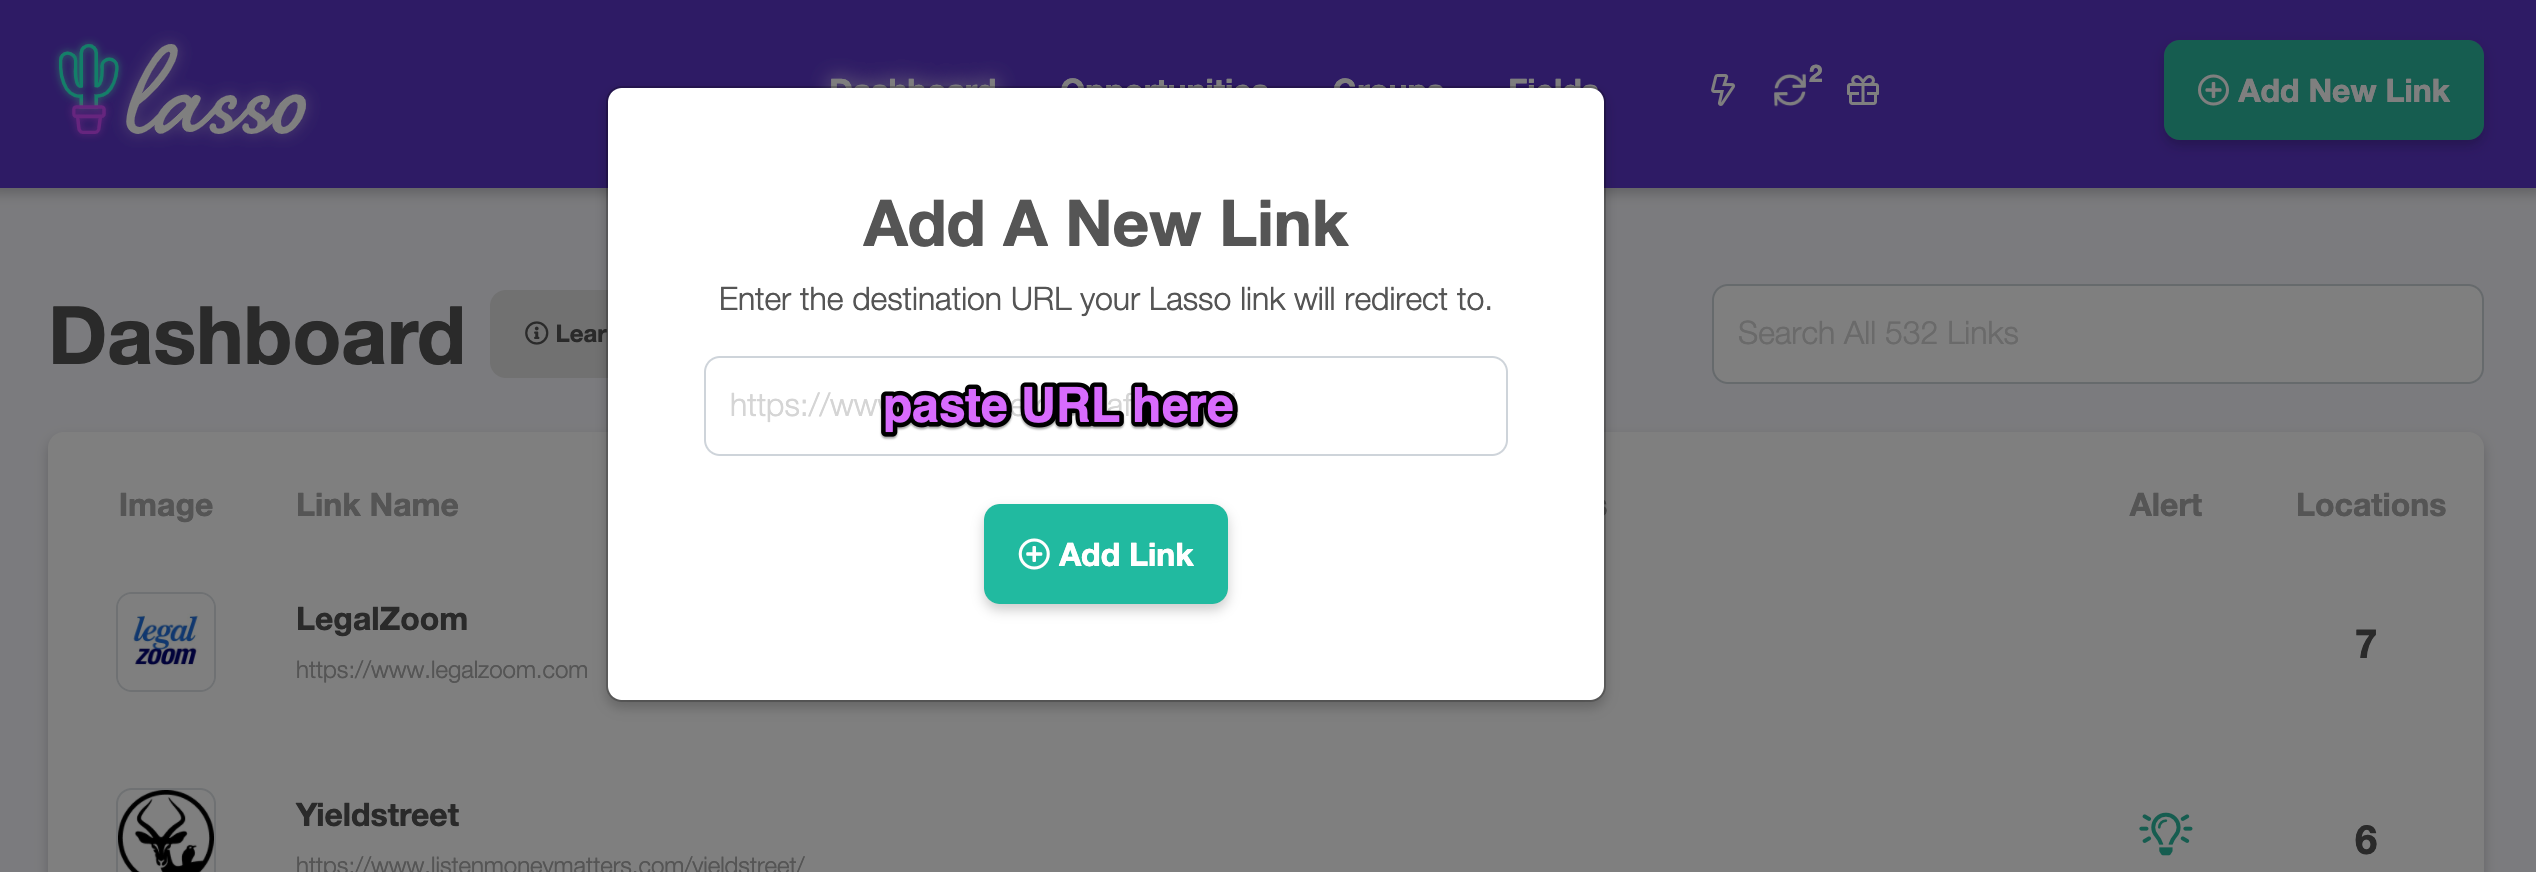 adding a new link to lasso